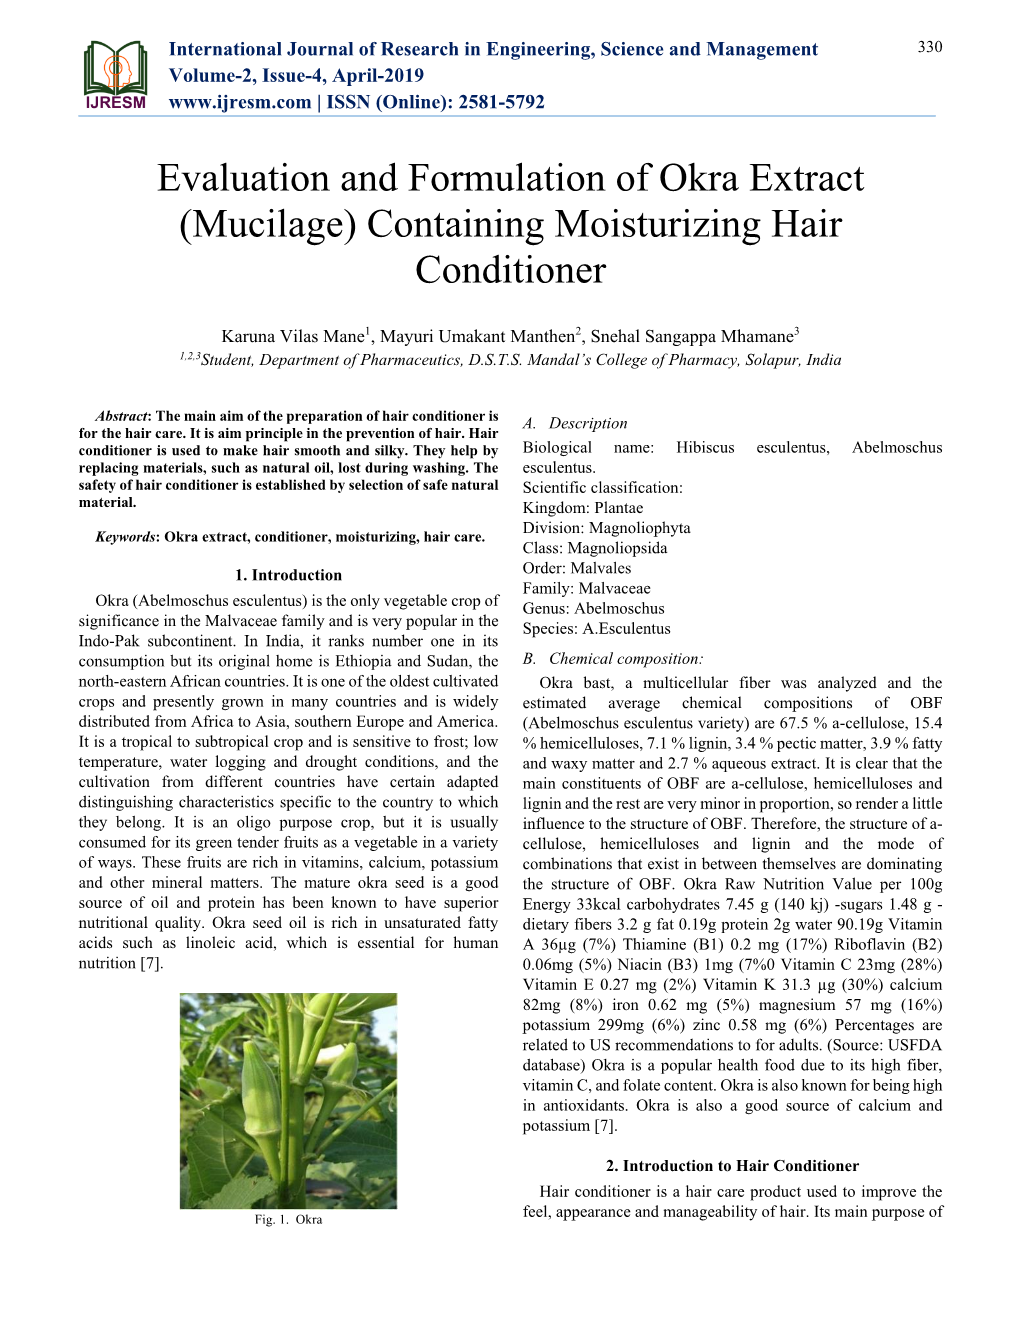 Evaluation and Formulation of Okra Extract (Mucilage) Containing Moisturizing Hair Conditioner